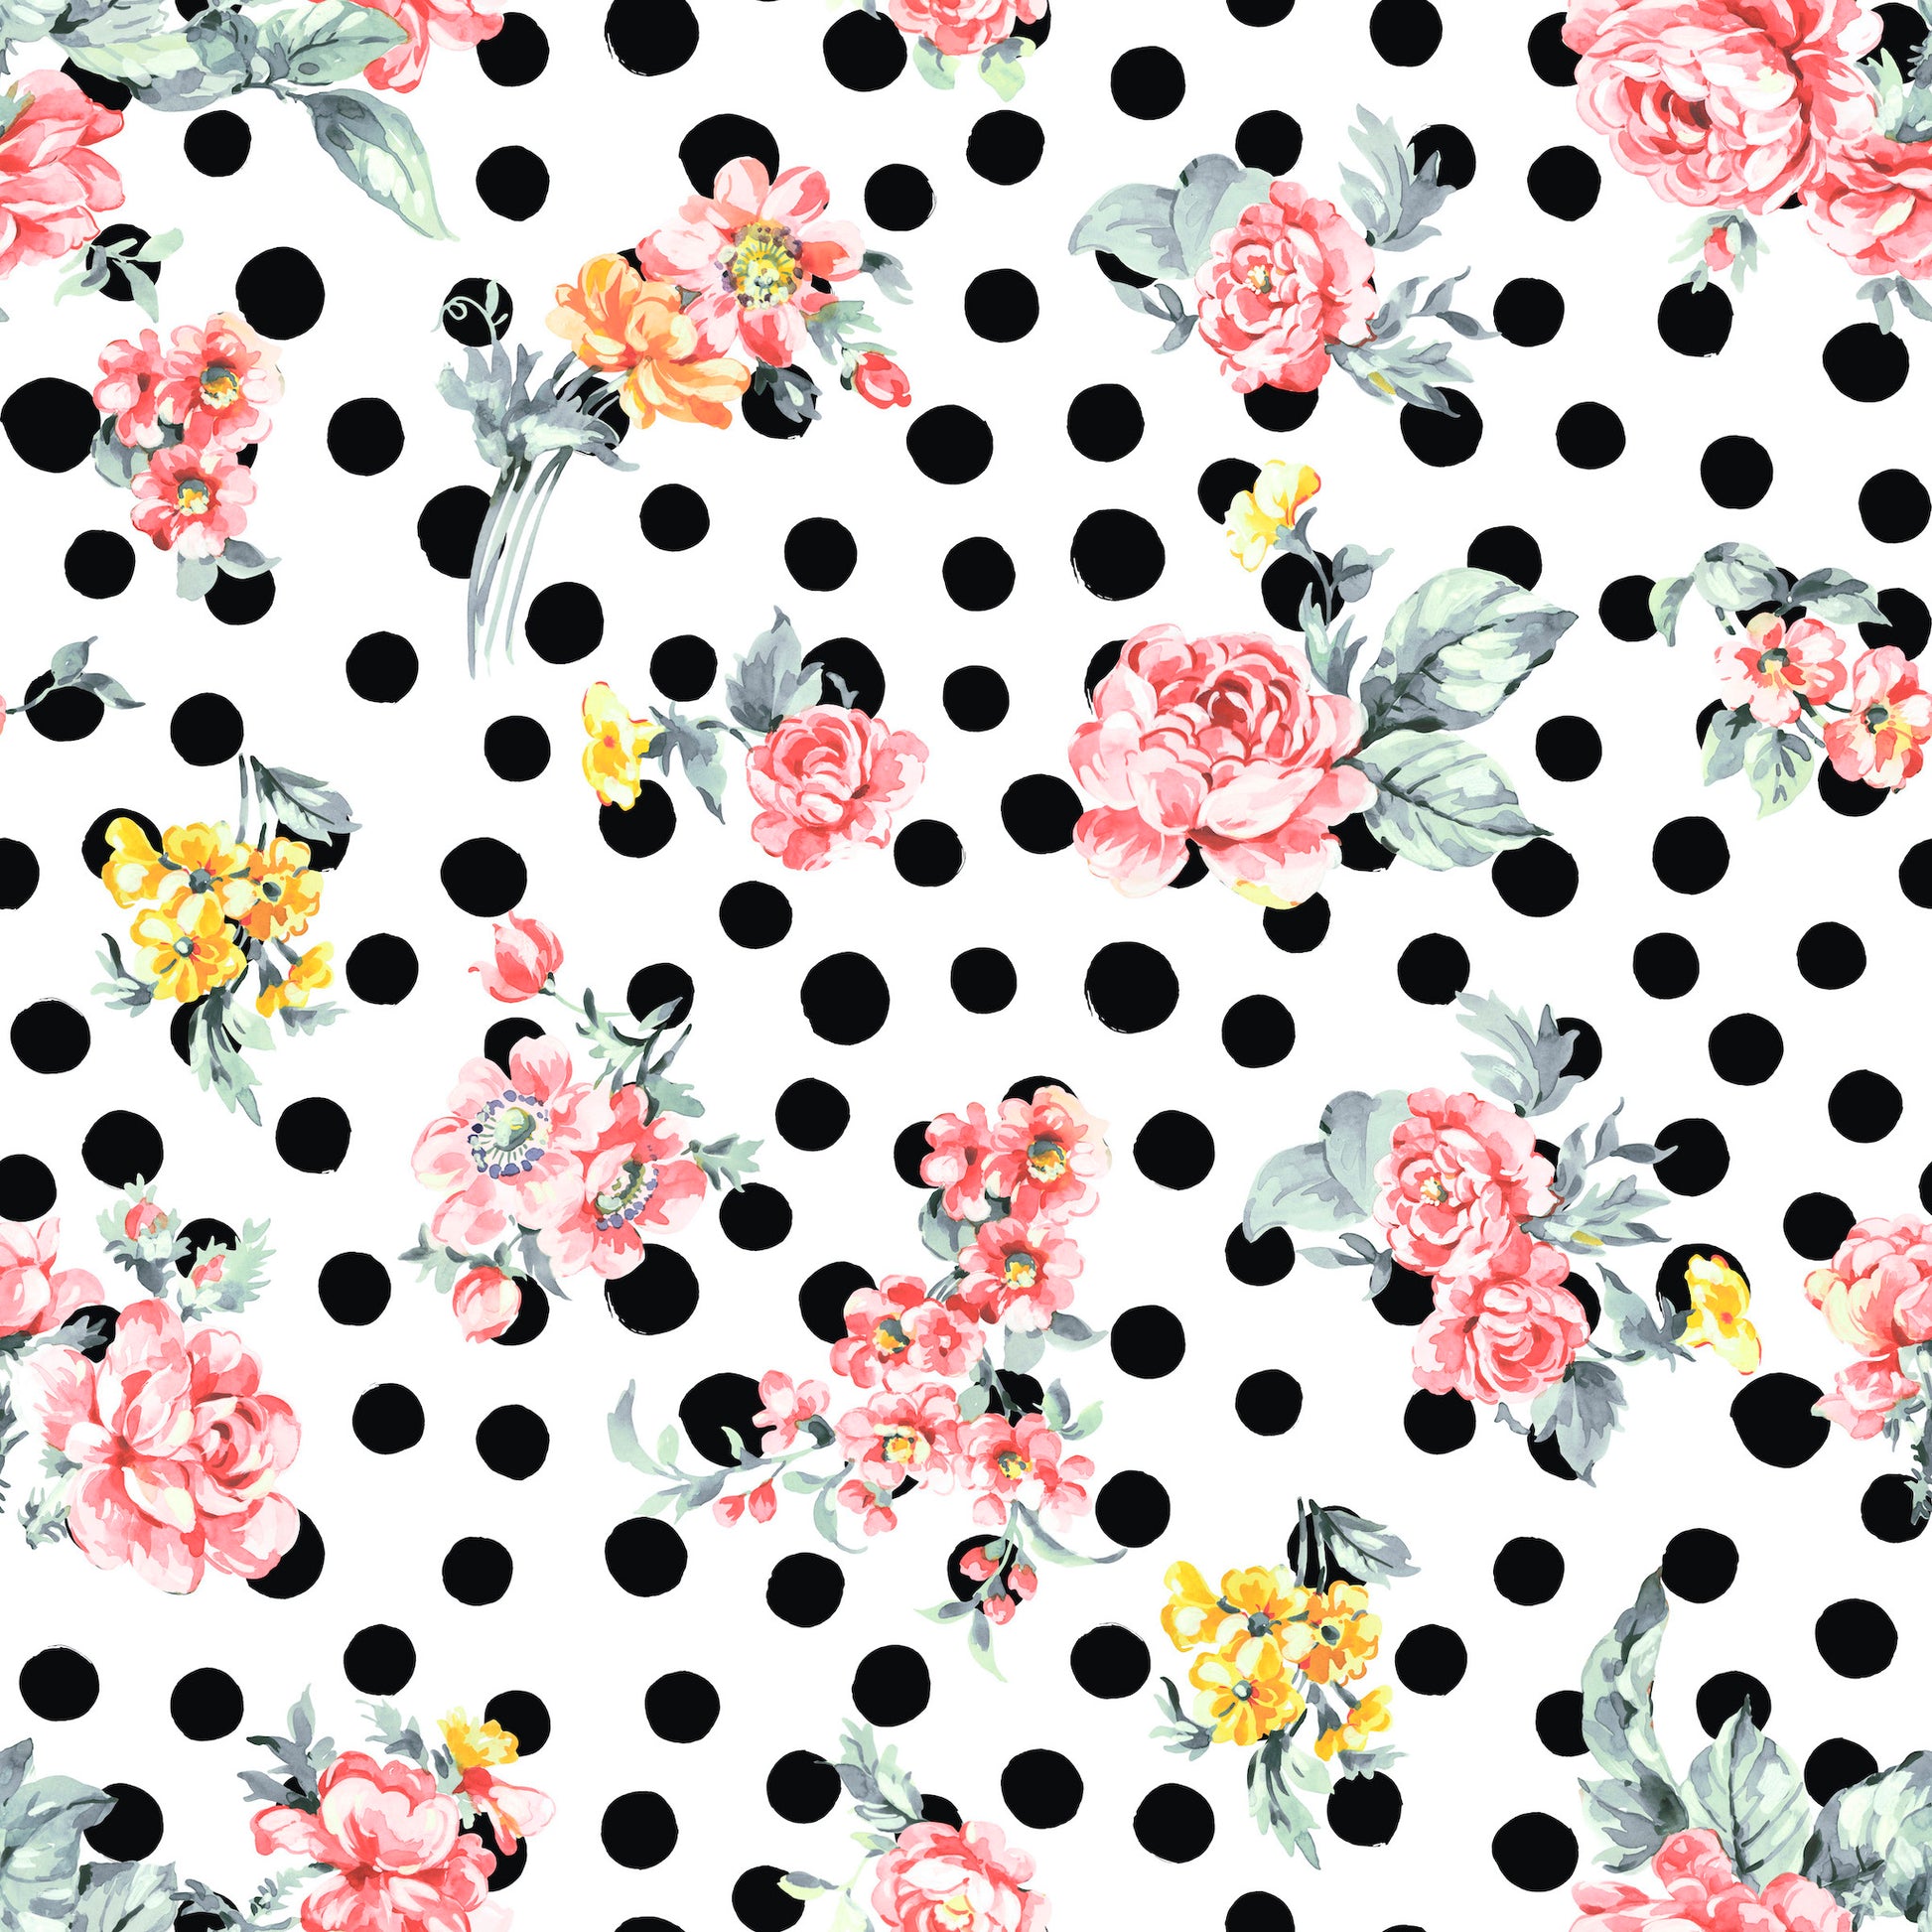 polka dot chic floral kids peel and stick removable fabric wallpaper